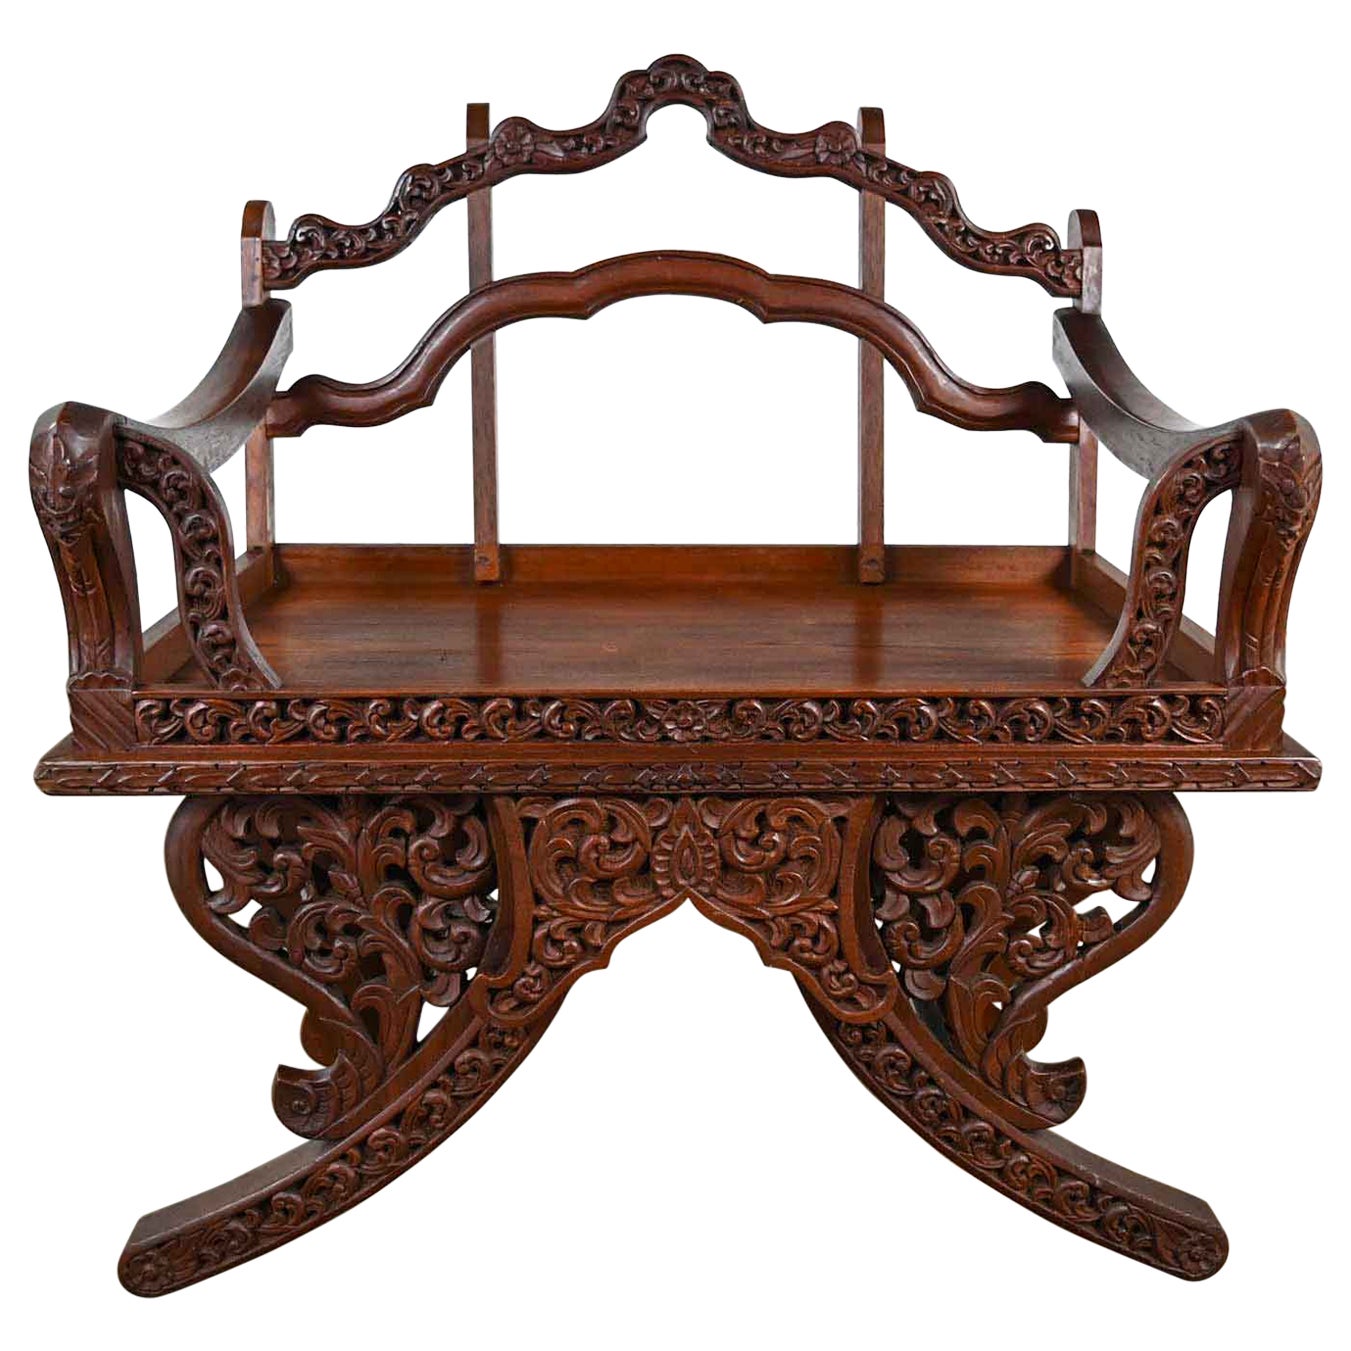 Chinoiserie Hand Carved Rosewood Howdah Elephant Saddle Chair Bangkok Thailand For Sale